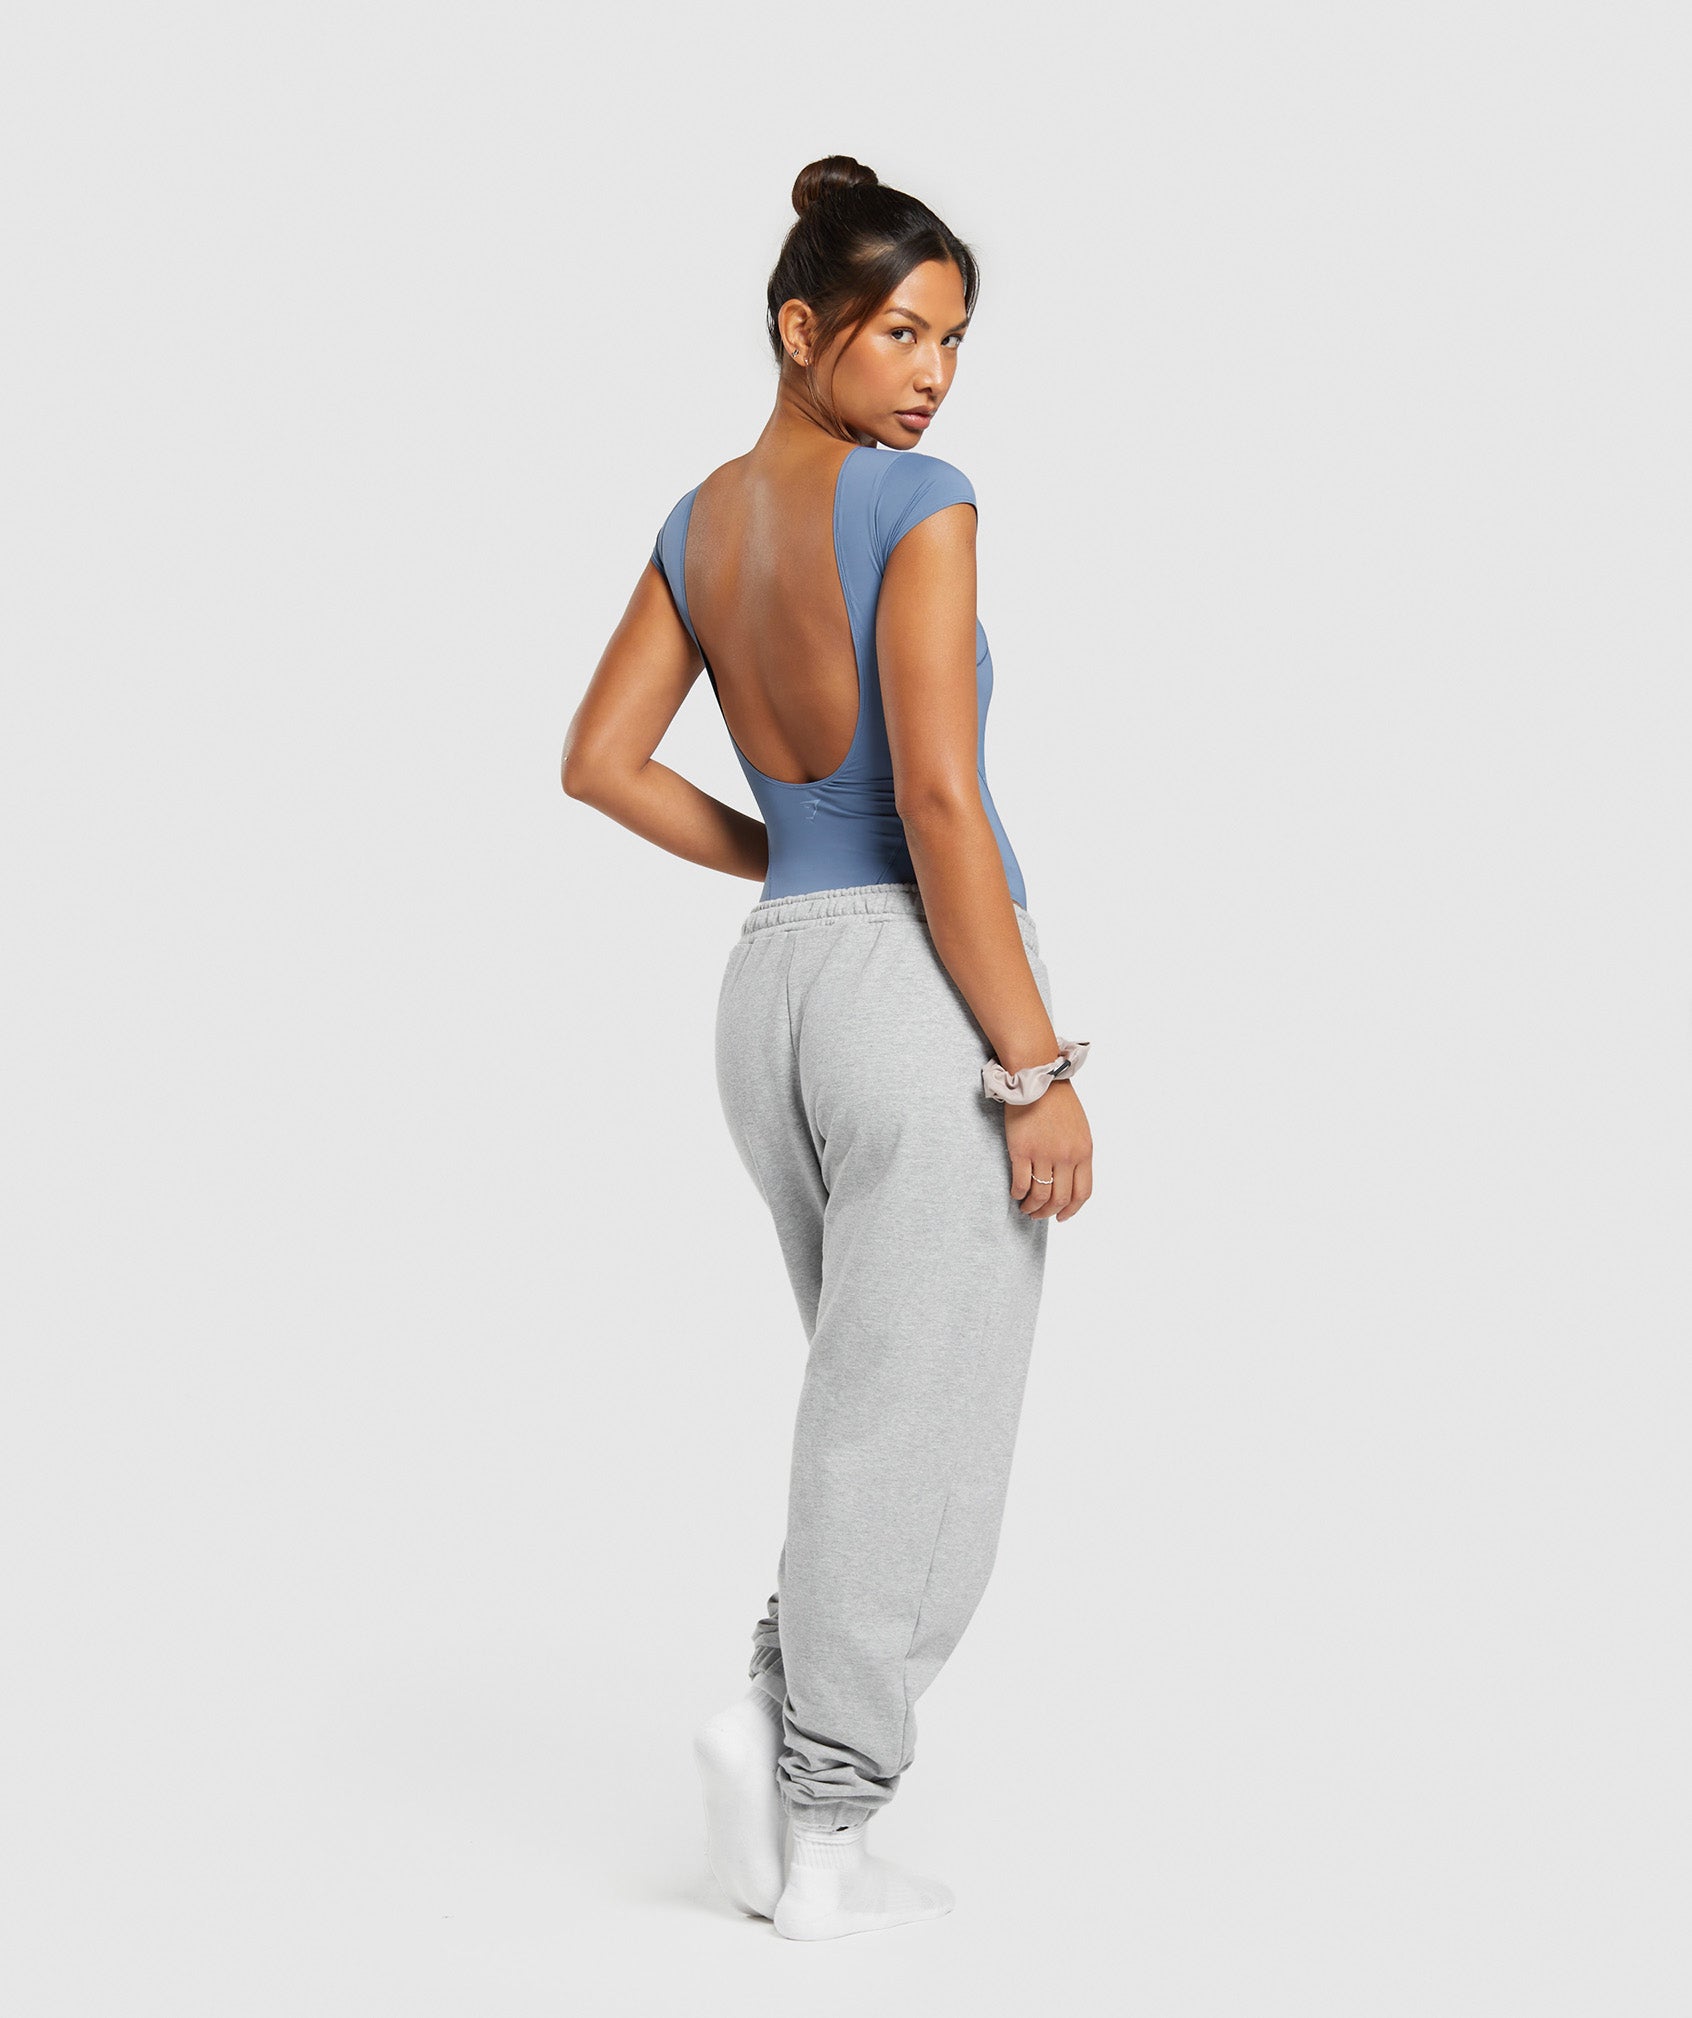 Elevate Bodysuit in Faded Blue - view 4